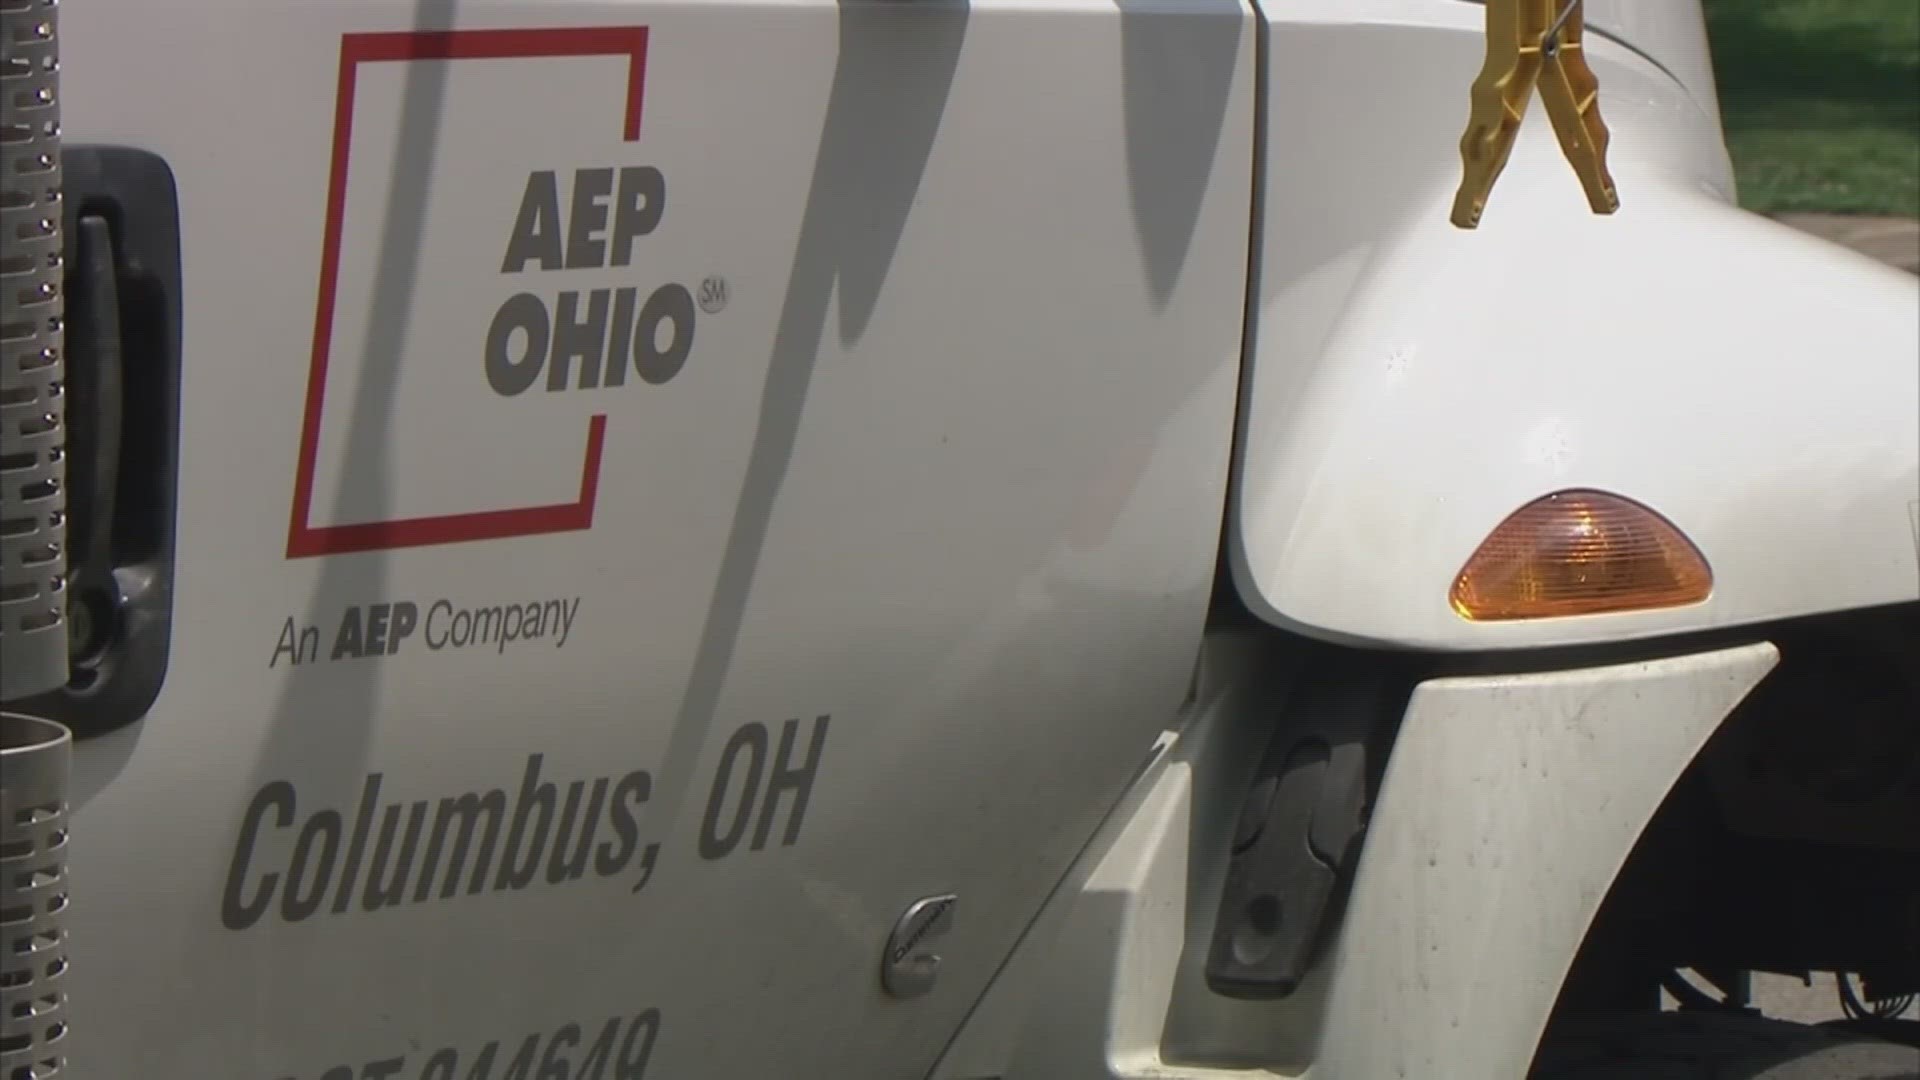 AEP Ohio warned customers that they should prepare for a rate increase – as high as 28 percent - on their utility bills beginning in June.